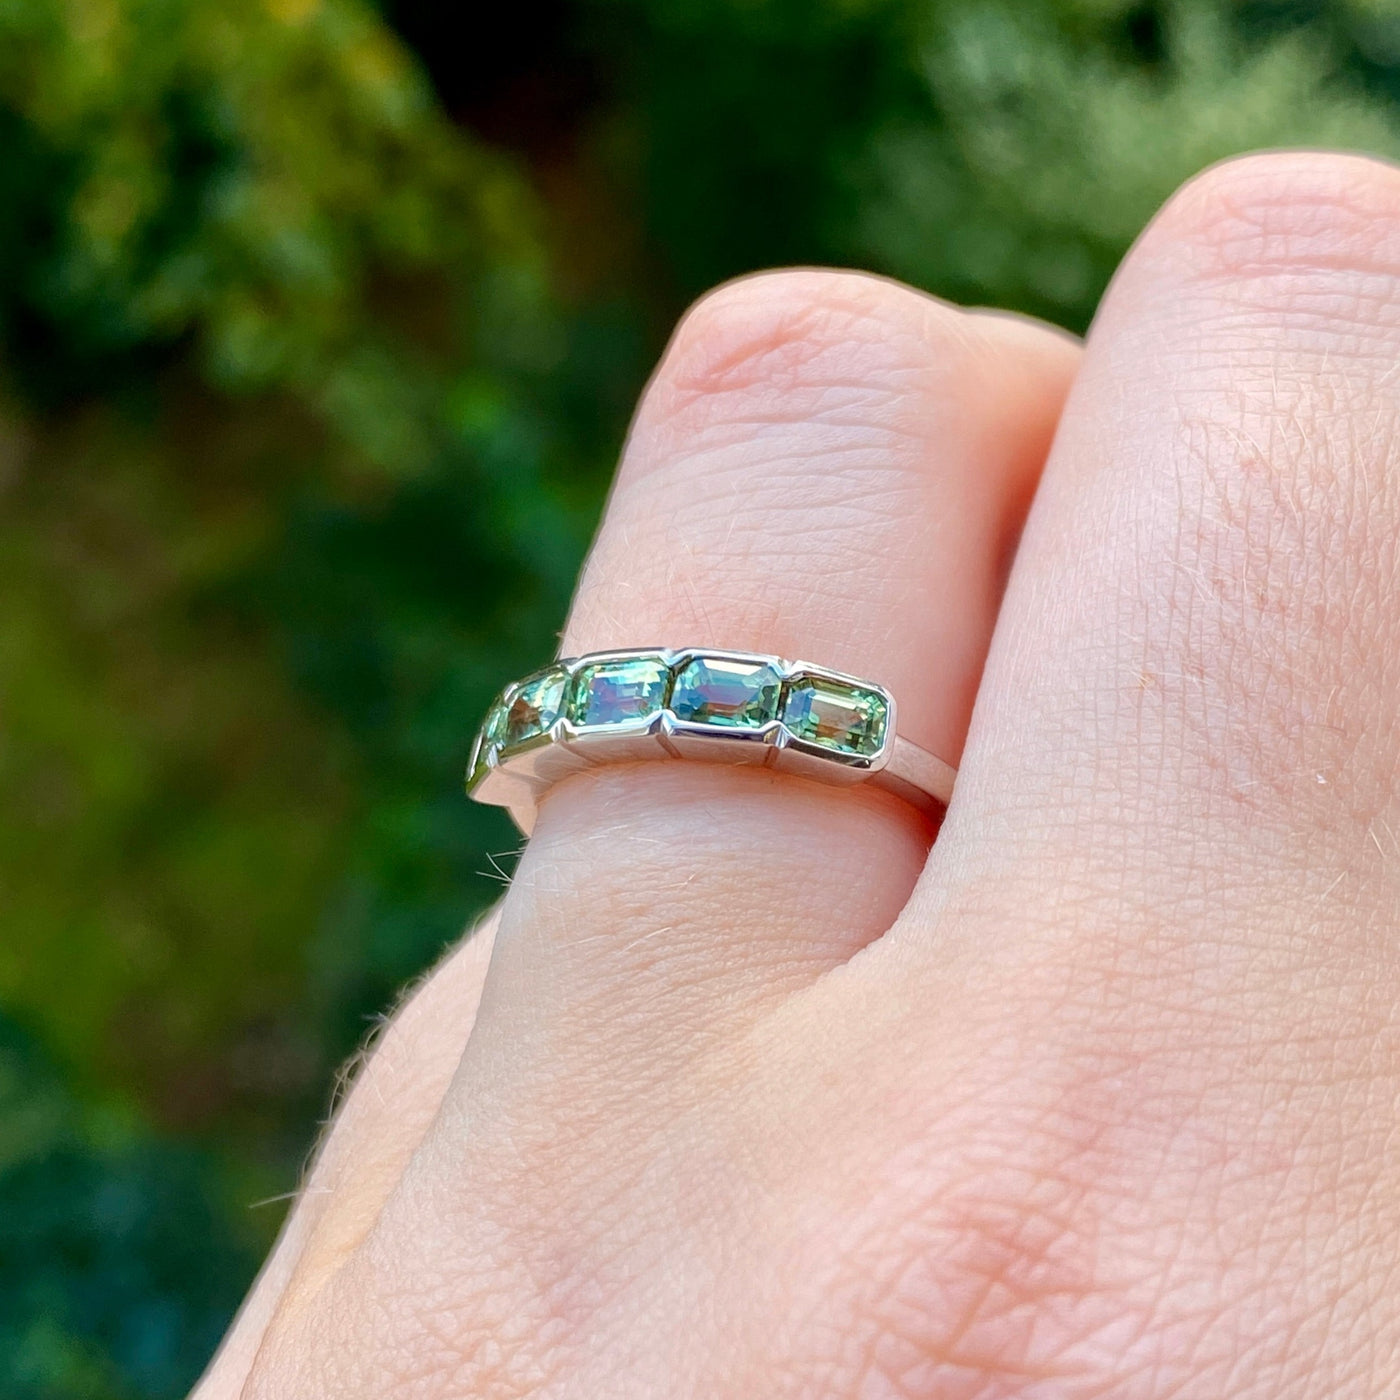 Sage - Emerald Cut Green Sapphire 5 Stone Half Rubover Eternity Style Ring in 9ct White Gold - Ready-to-Wear